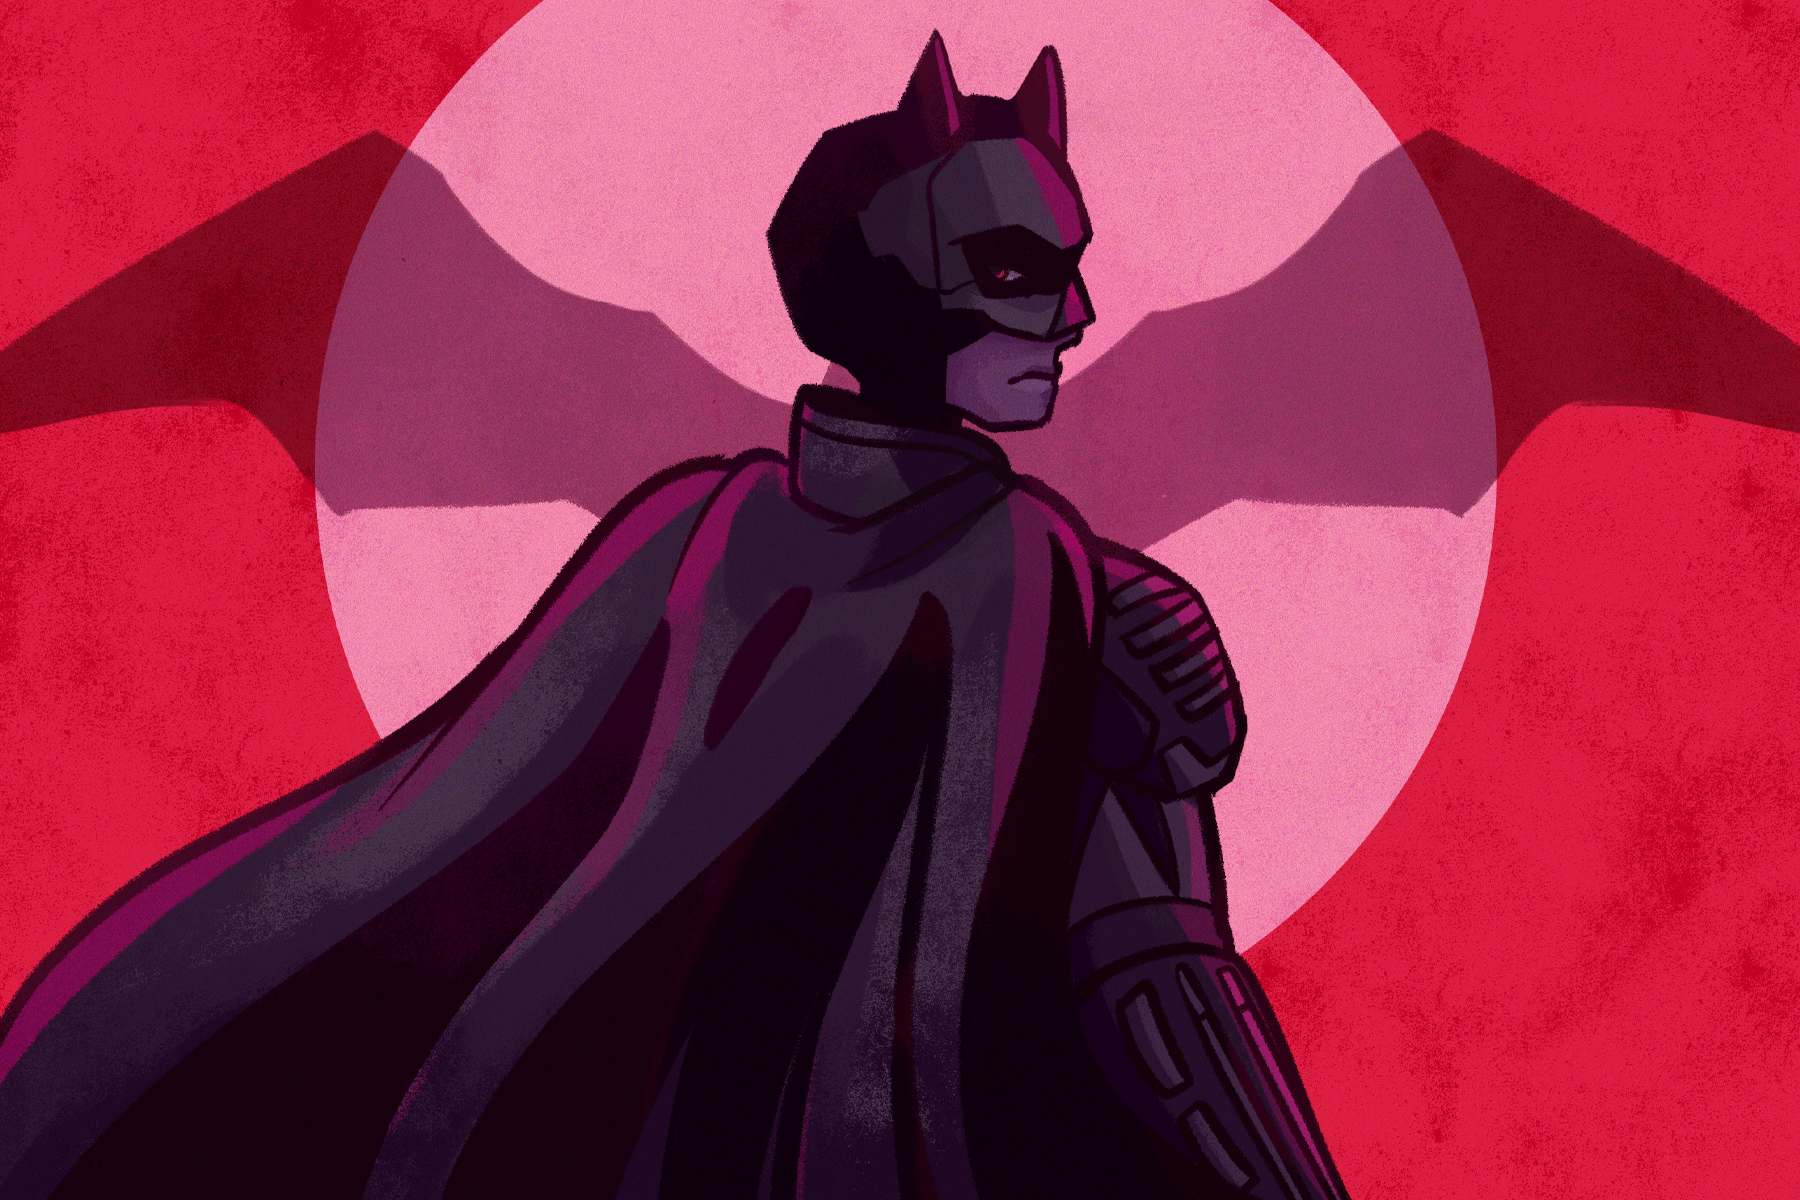 in article about The Batman, Bat symbol covering a pink moon and red sky, with Batman facing the symbol but looking over his right shoulder